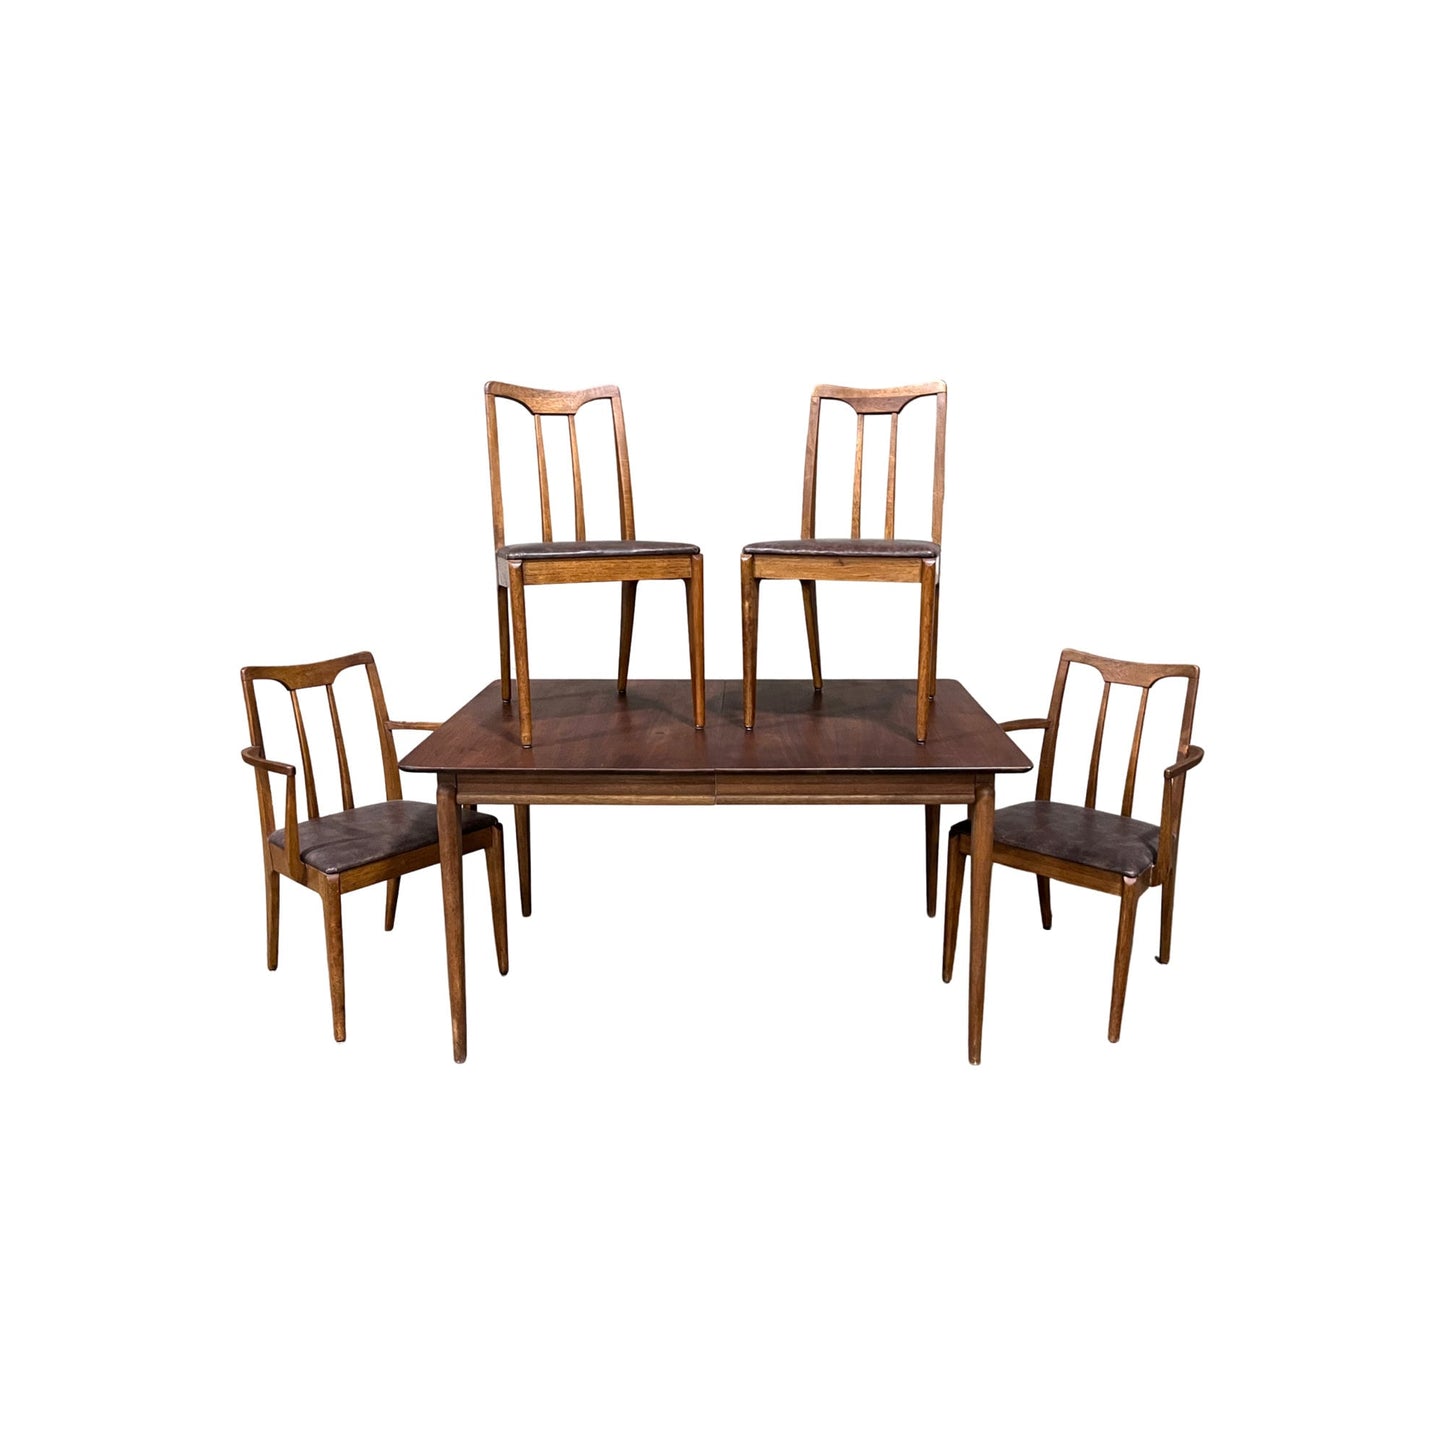 John Van Koert for Drexel Projection Dining Set - Dining Table and Chairs